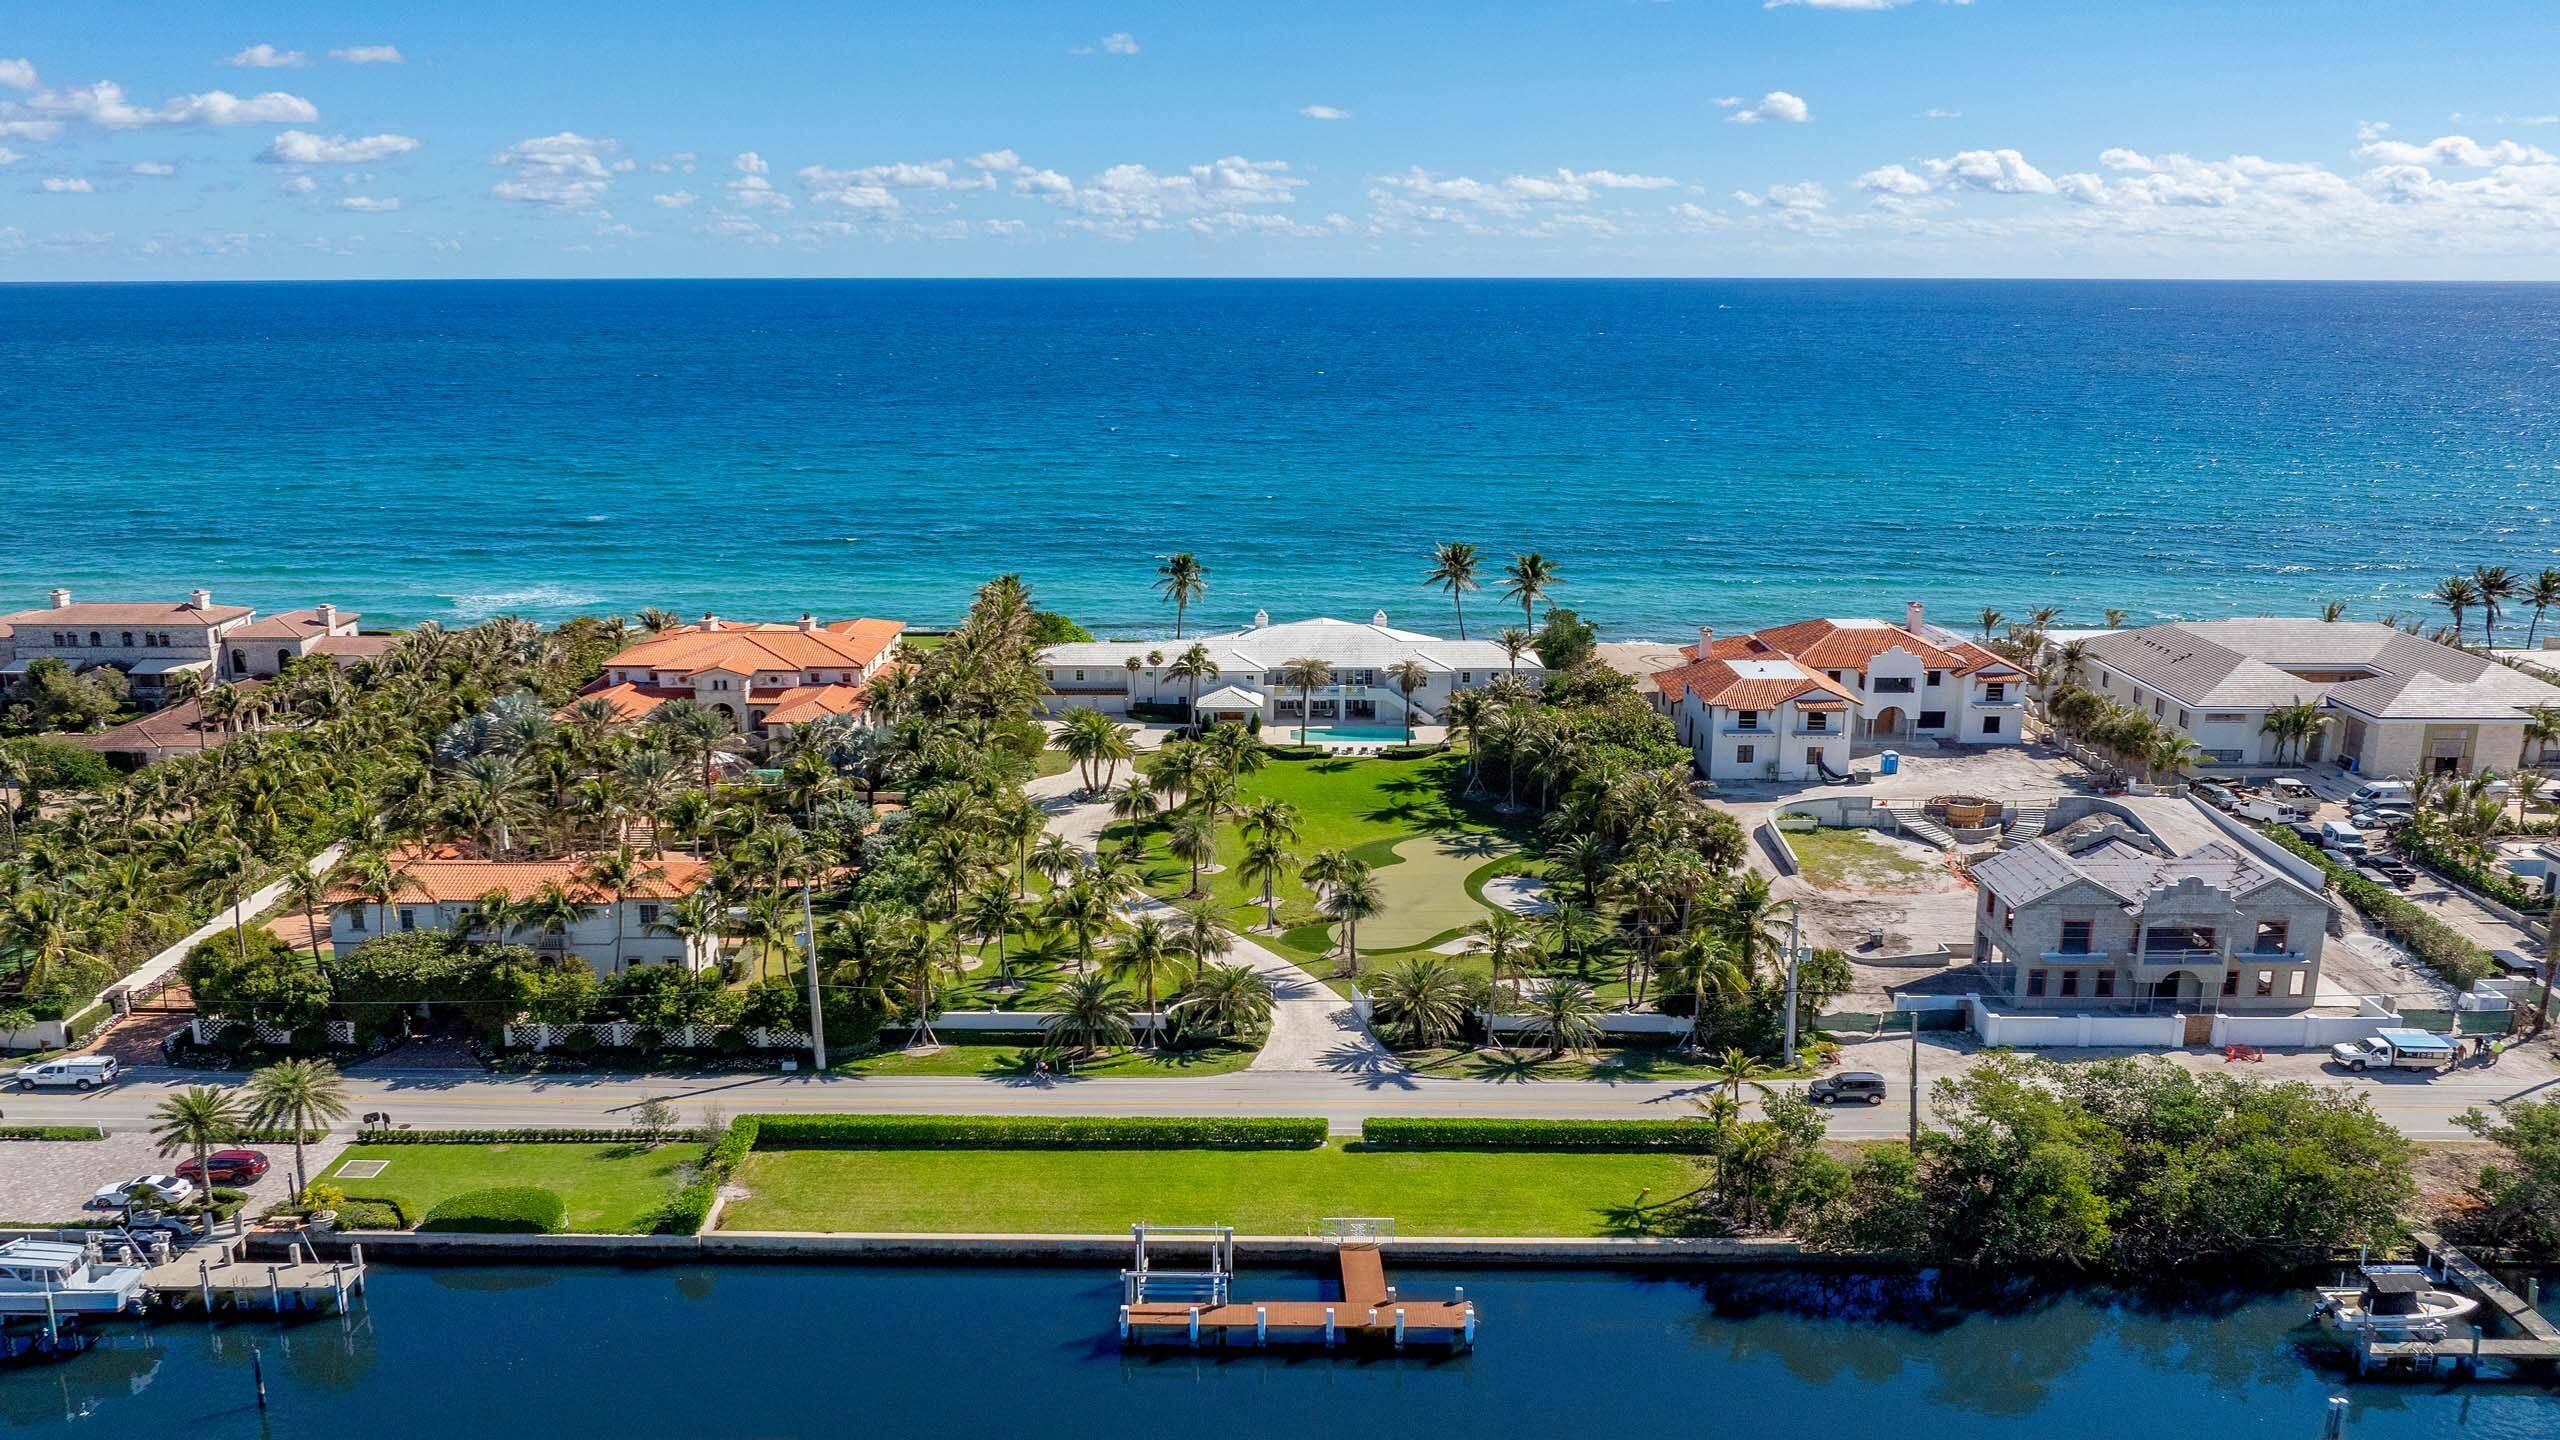 This exceptional direct ocean to Intracoastal estate offers almost 200 feet of direct oceanfrontage and 190 feet of Intracoastal waterfrontage with spectacular views and protected deep water dockage.